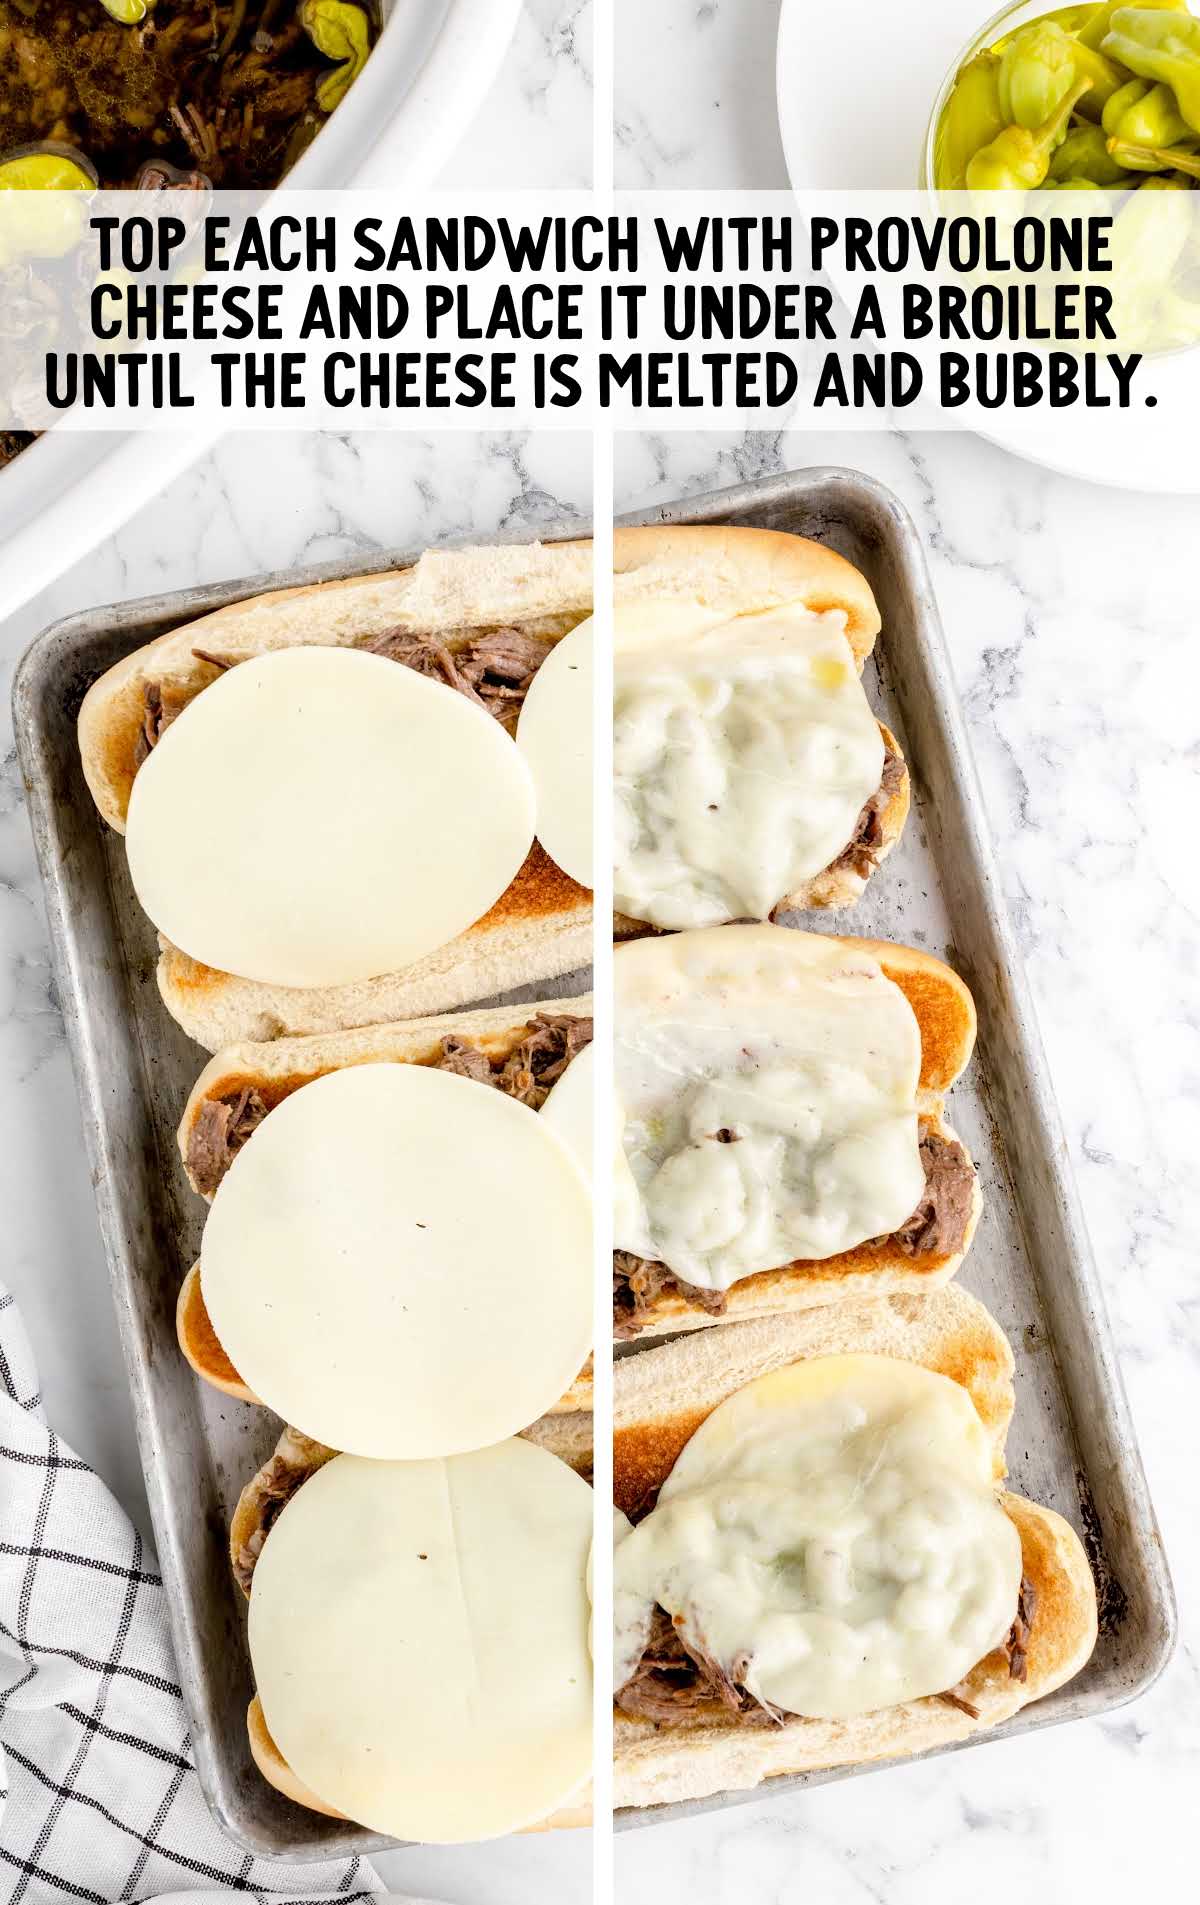 sandwiches topped with provolone cheese